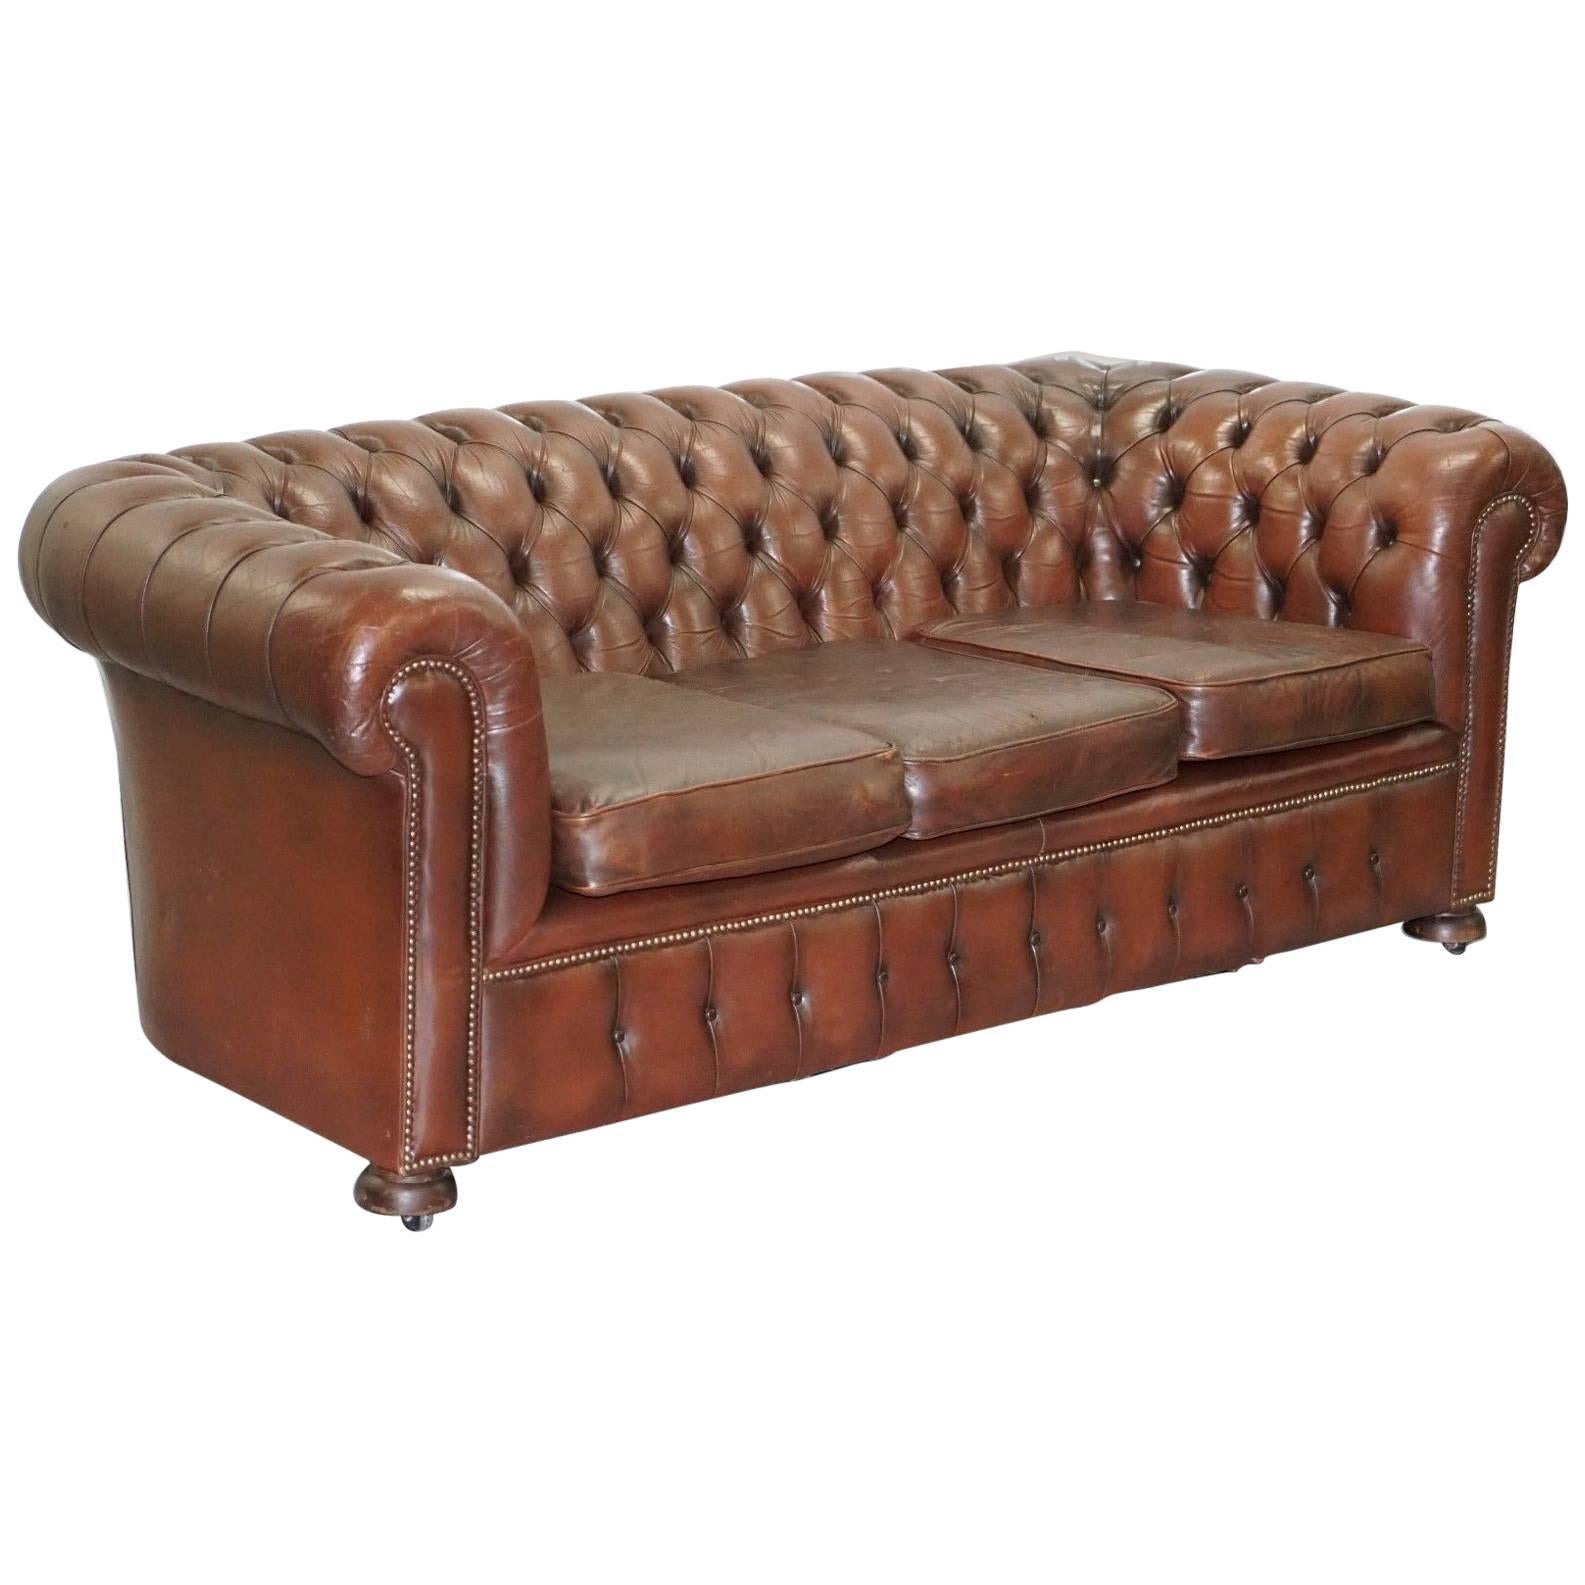 Vintage Midcentury Distressed Chesterfield Aged Brown Leather Club Sofa Oak